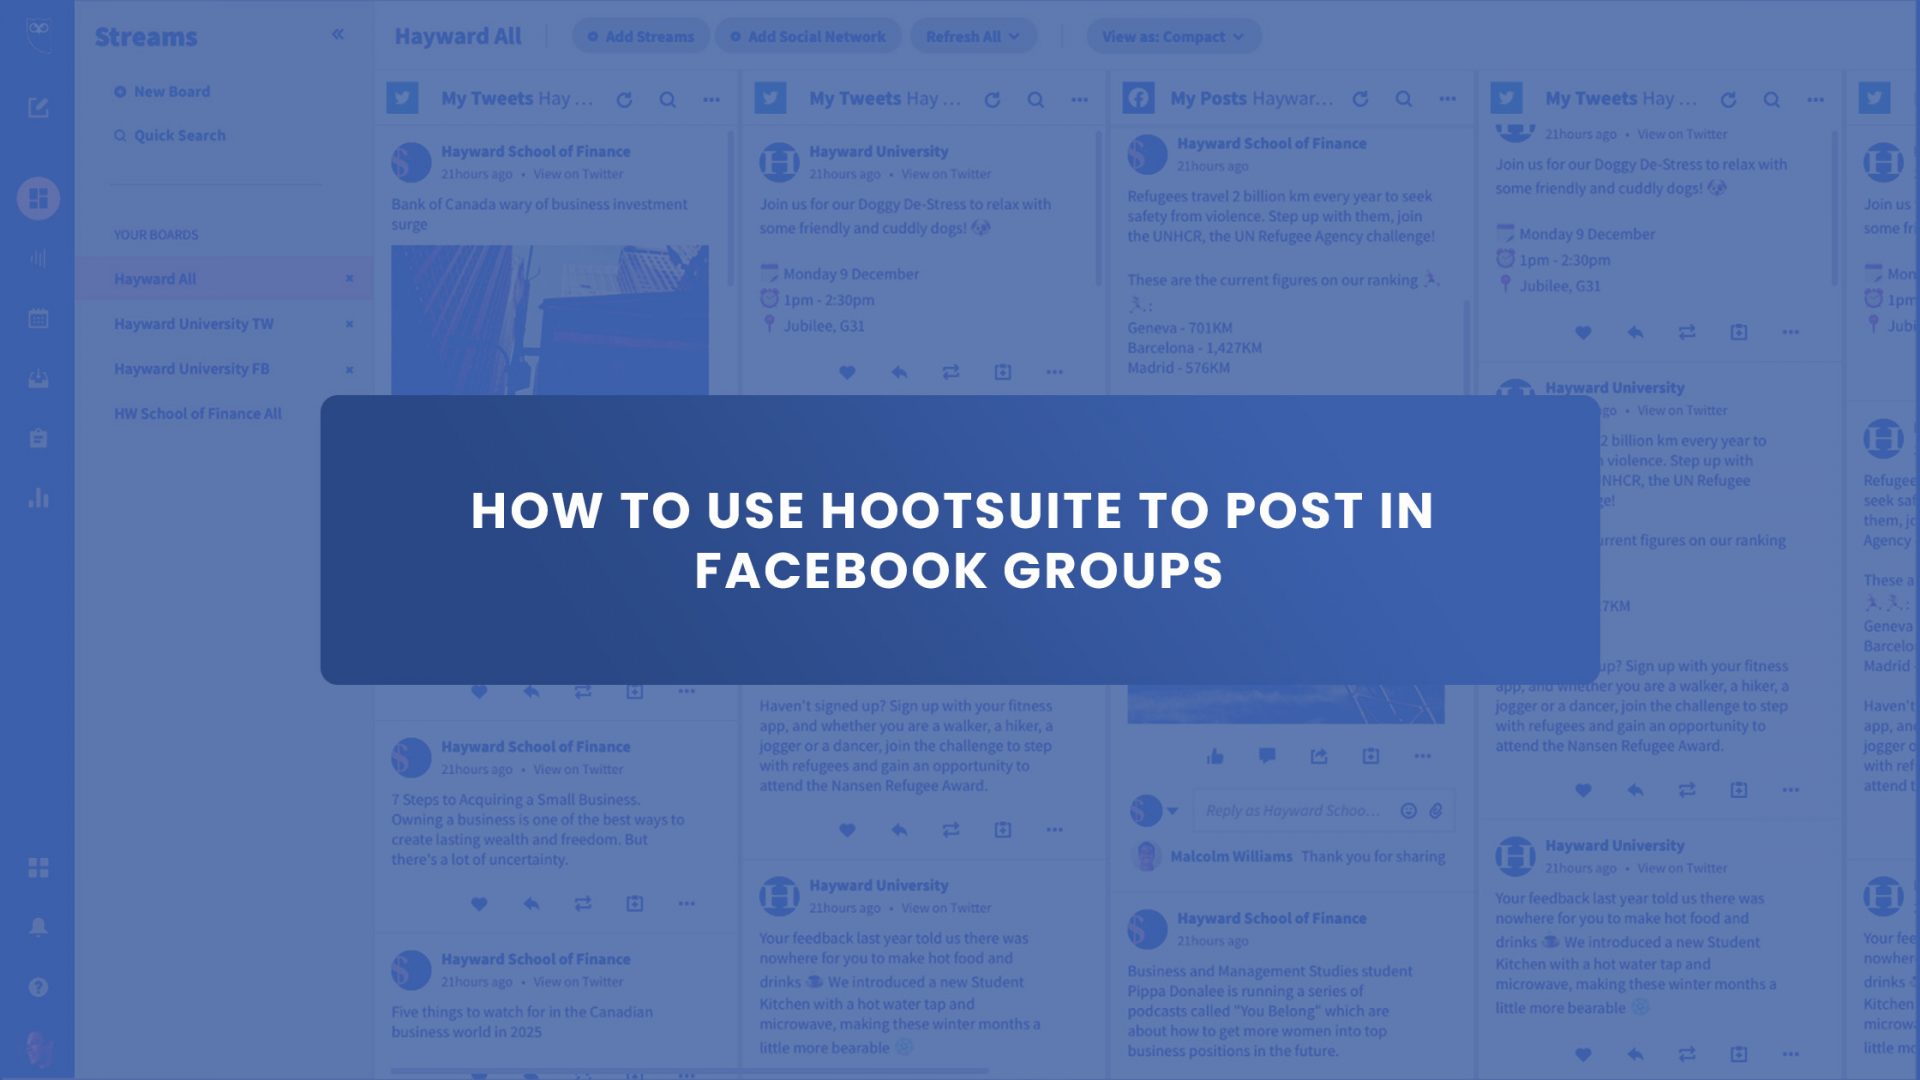 How to Use Hootsuite to Post in Facebook Groups